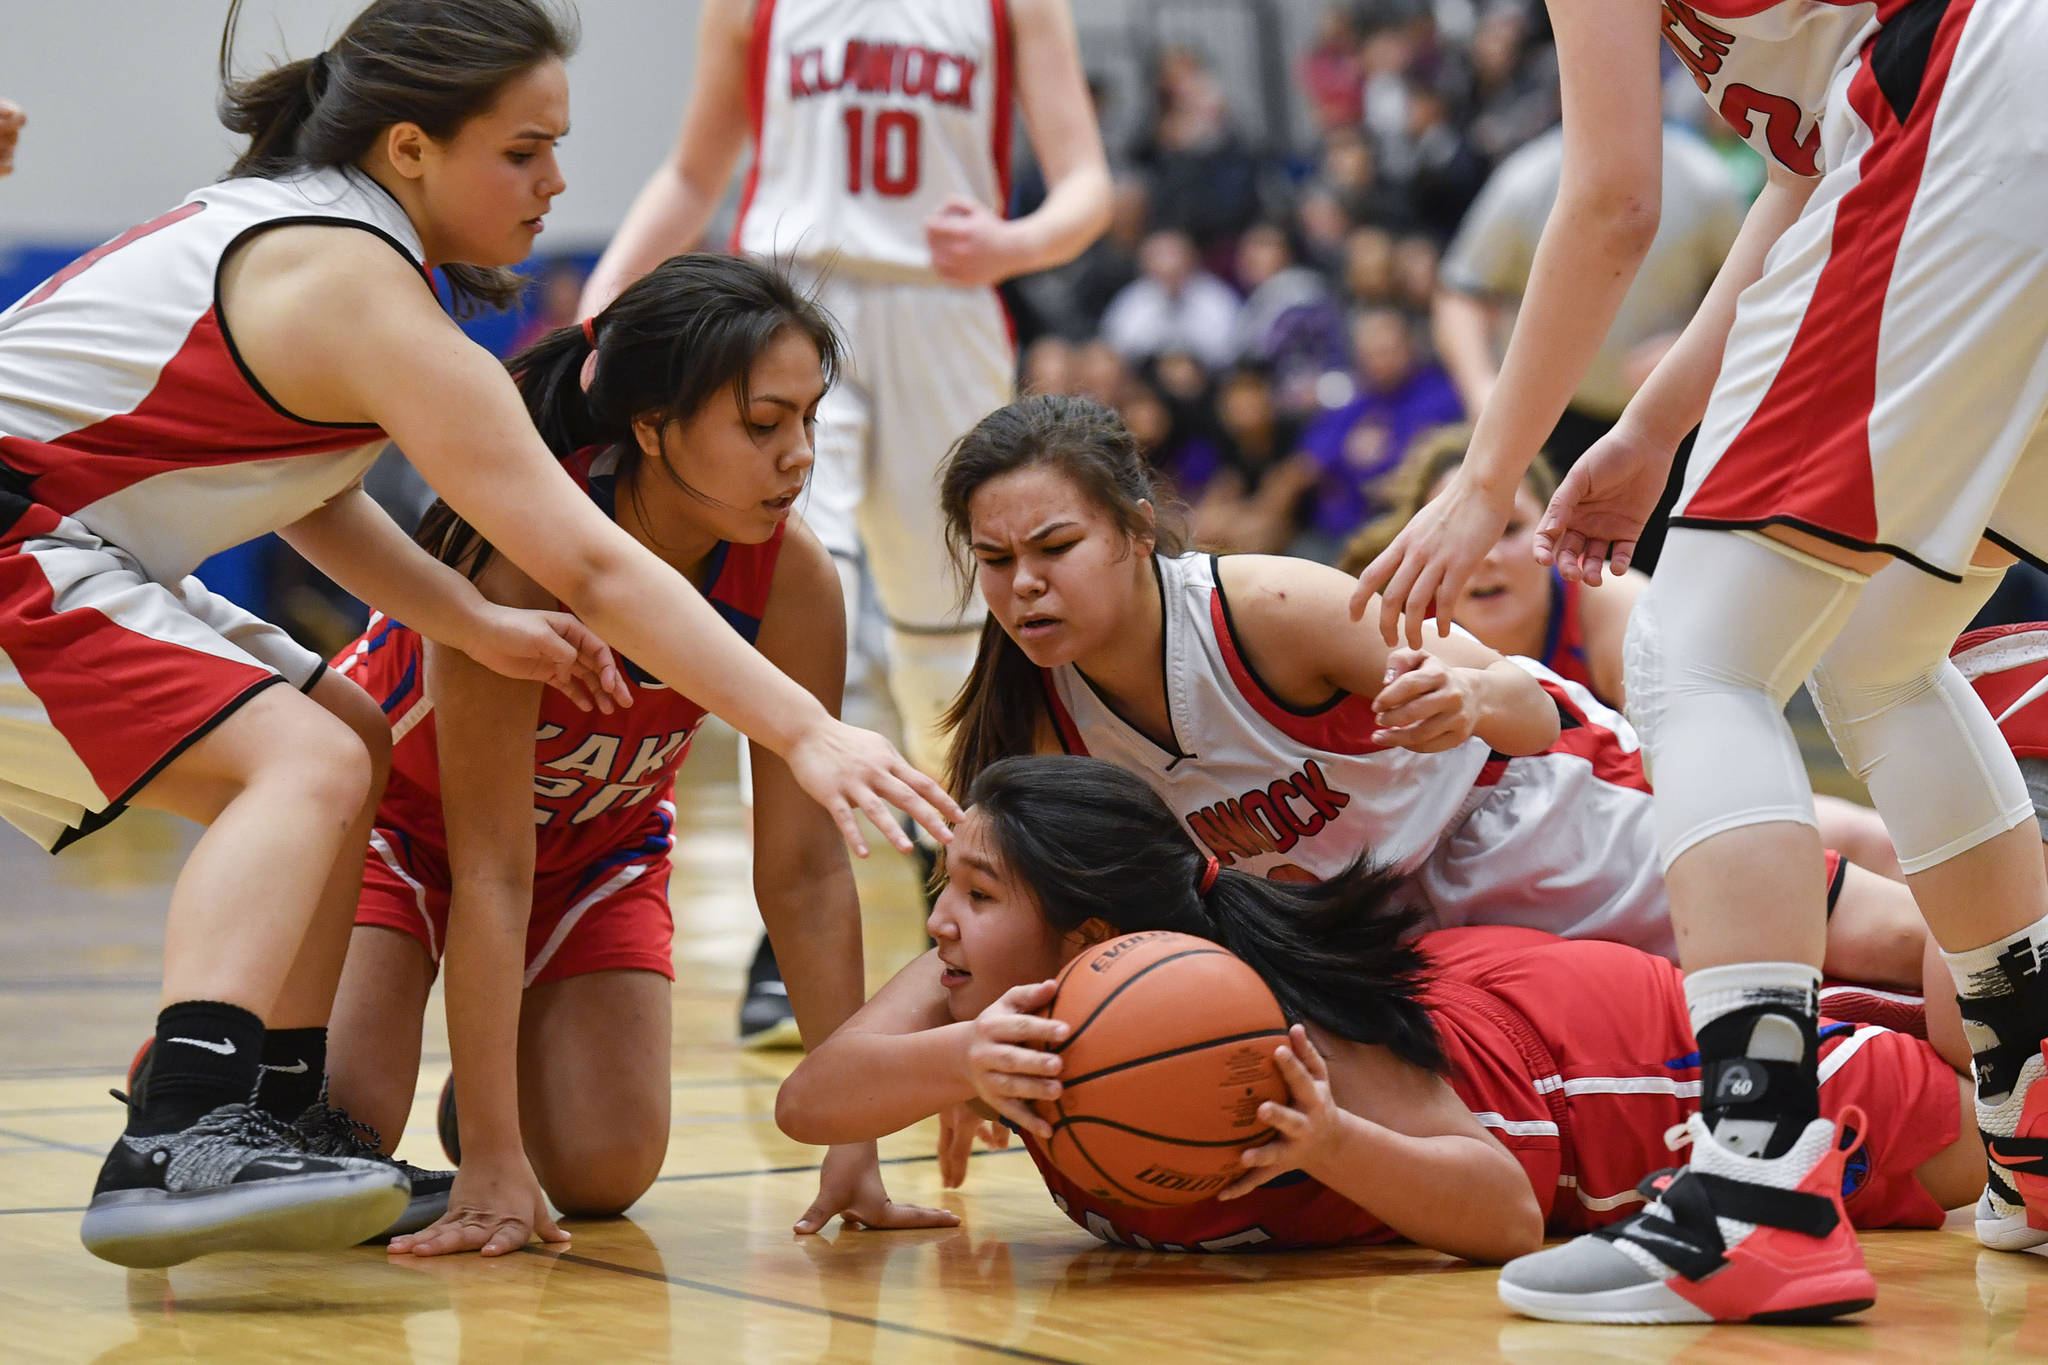 Kake’s Felicia Ross-Shaquanie, right, grabs the ball in a scrum with teammate Alexis Copsey and Klawock’s Valory Smith-Turpin, left, and Malory Smith-Turpin in the finals of the Region V 1A Basketball Championships at Thunder Mountain High School on Friday, March 1, 2019. Klawock won 47-46. (Michael Penn | Juneau Empire)